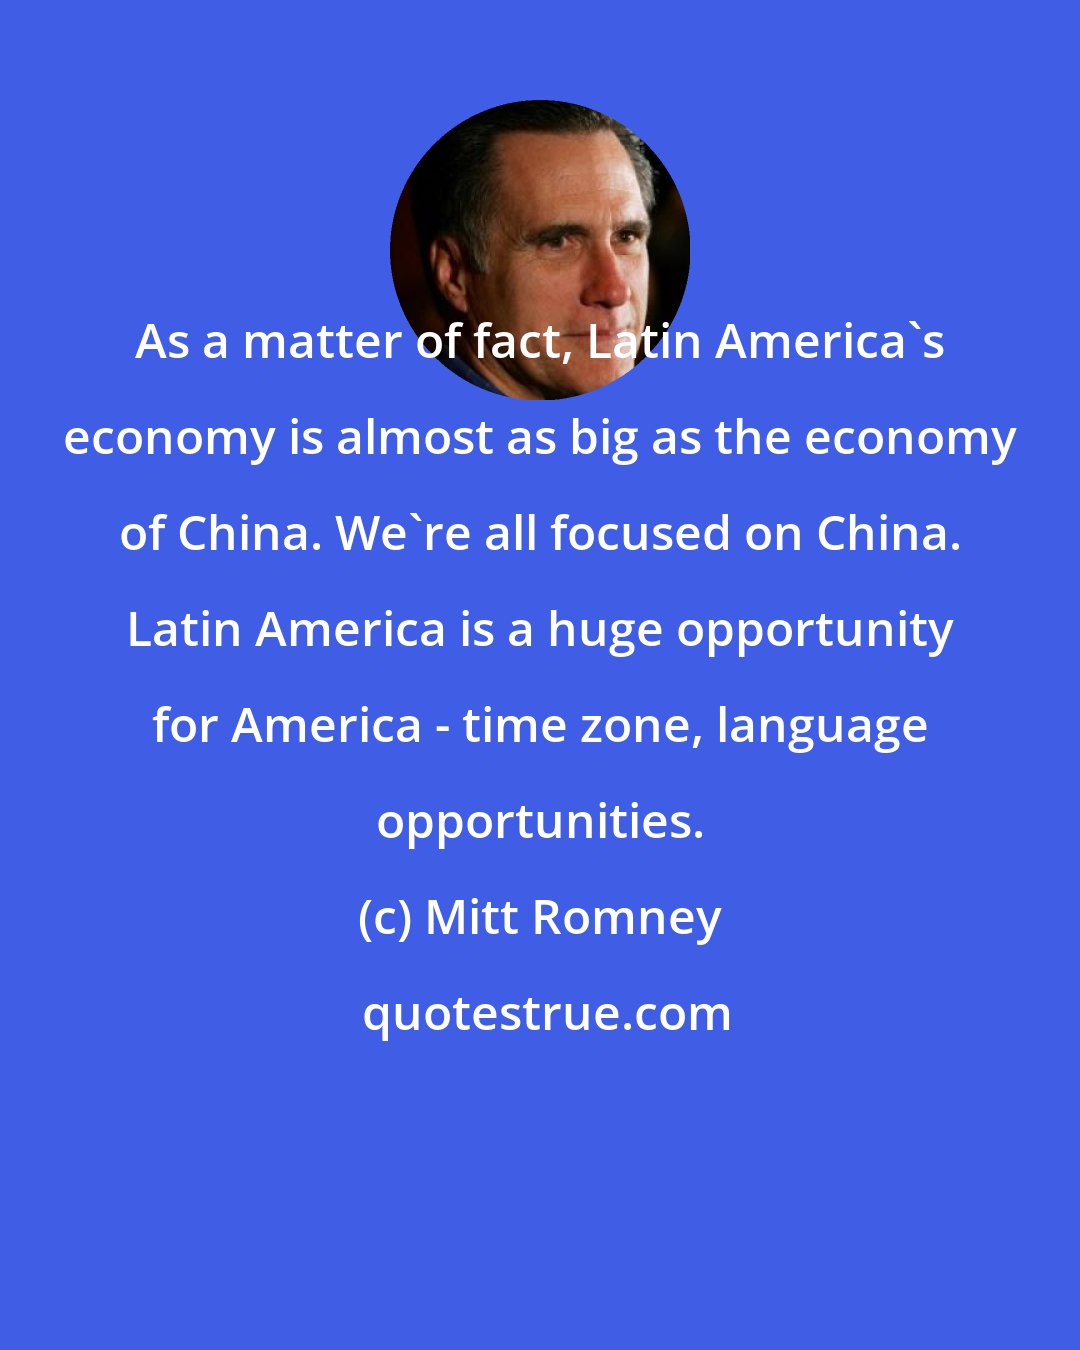 Mitt Romney: As a matter of fact, Latin America's economy is almost as big as the economy of China. We're all focused on China. Latin America is a huge opportunity for America - time zone, language opportunities.